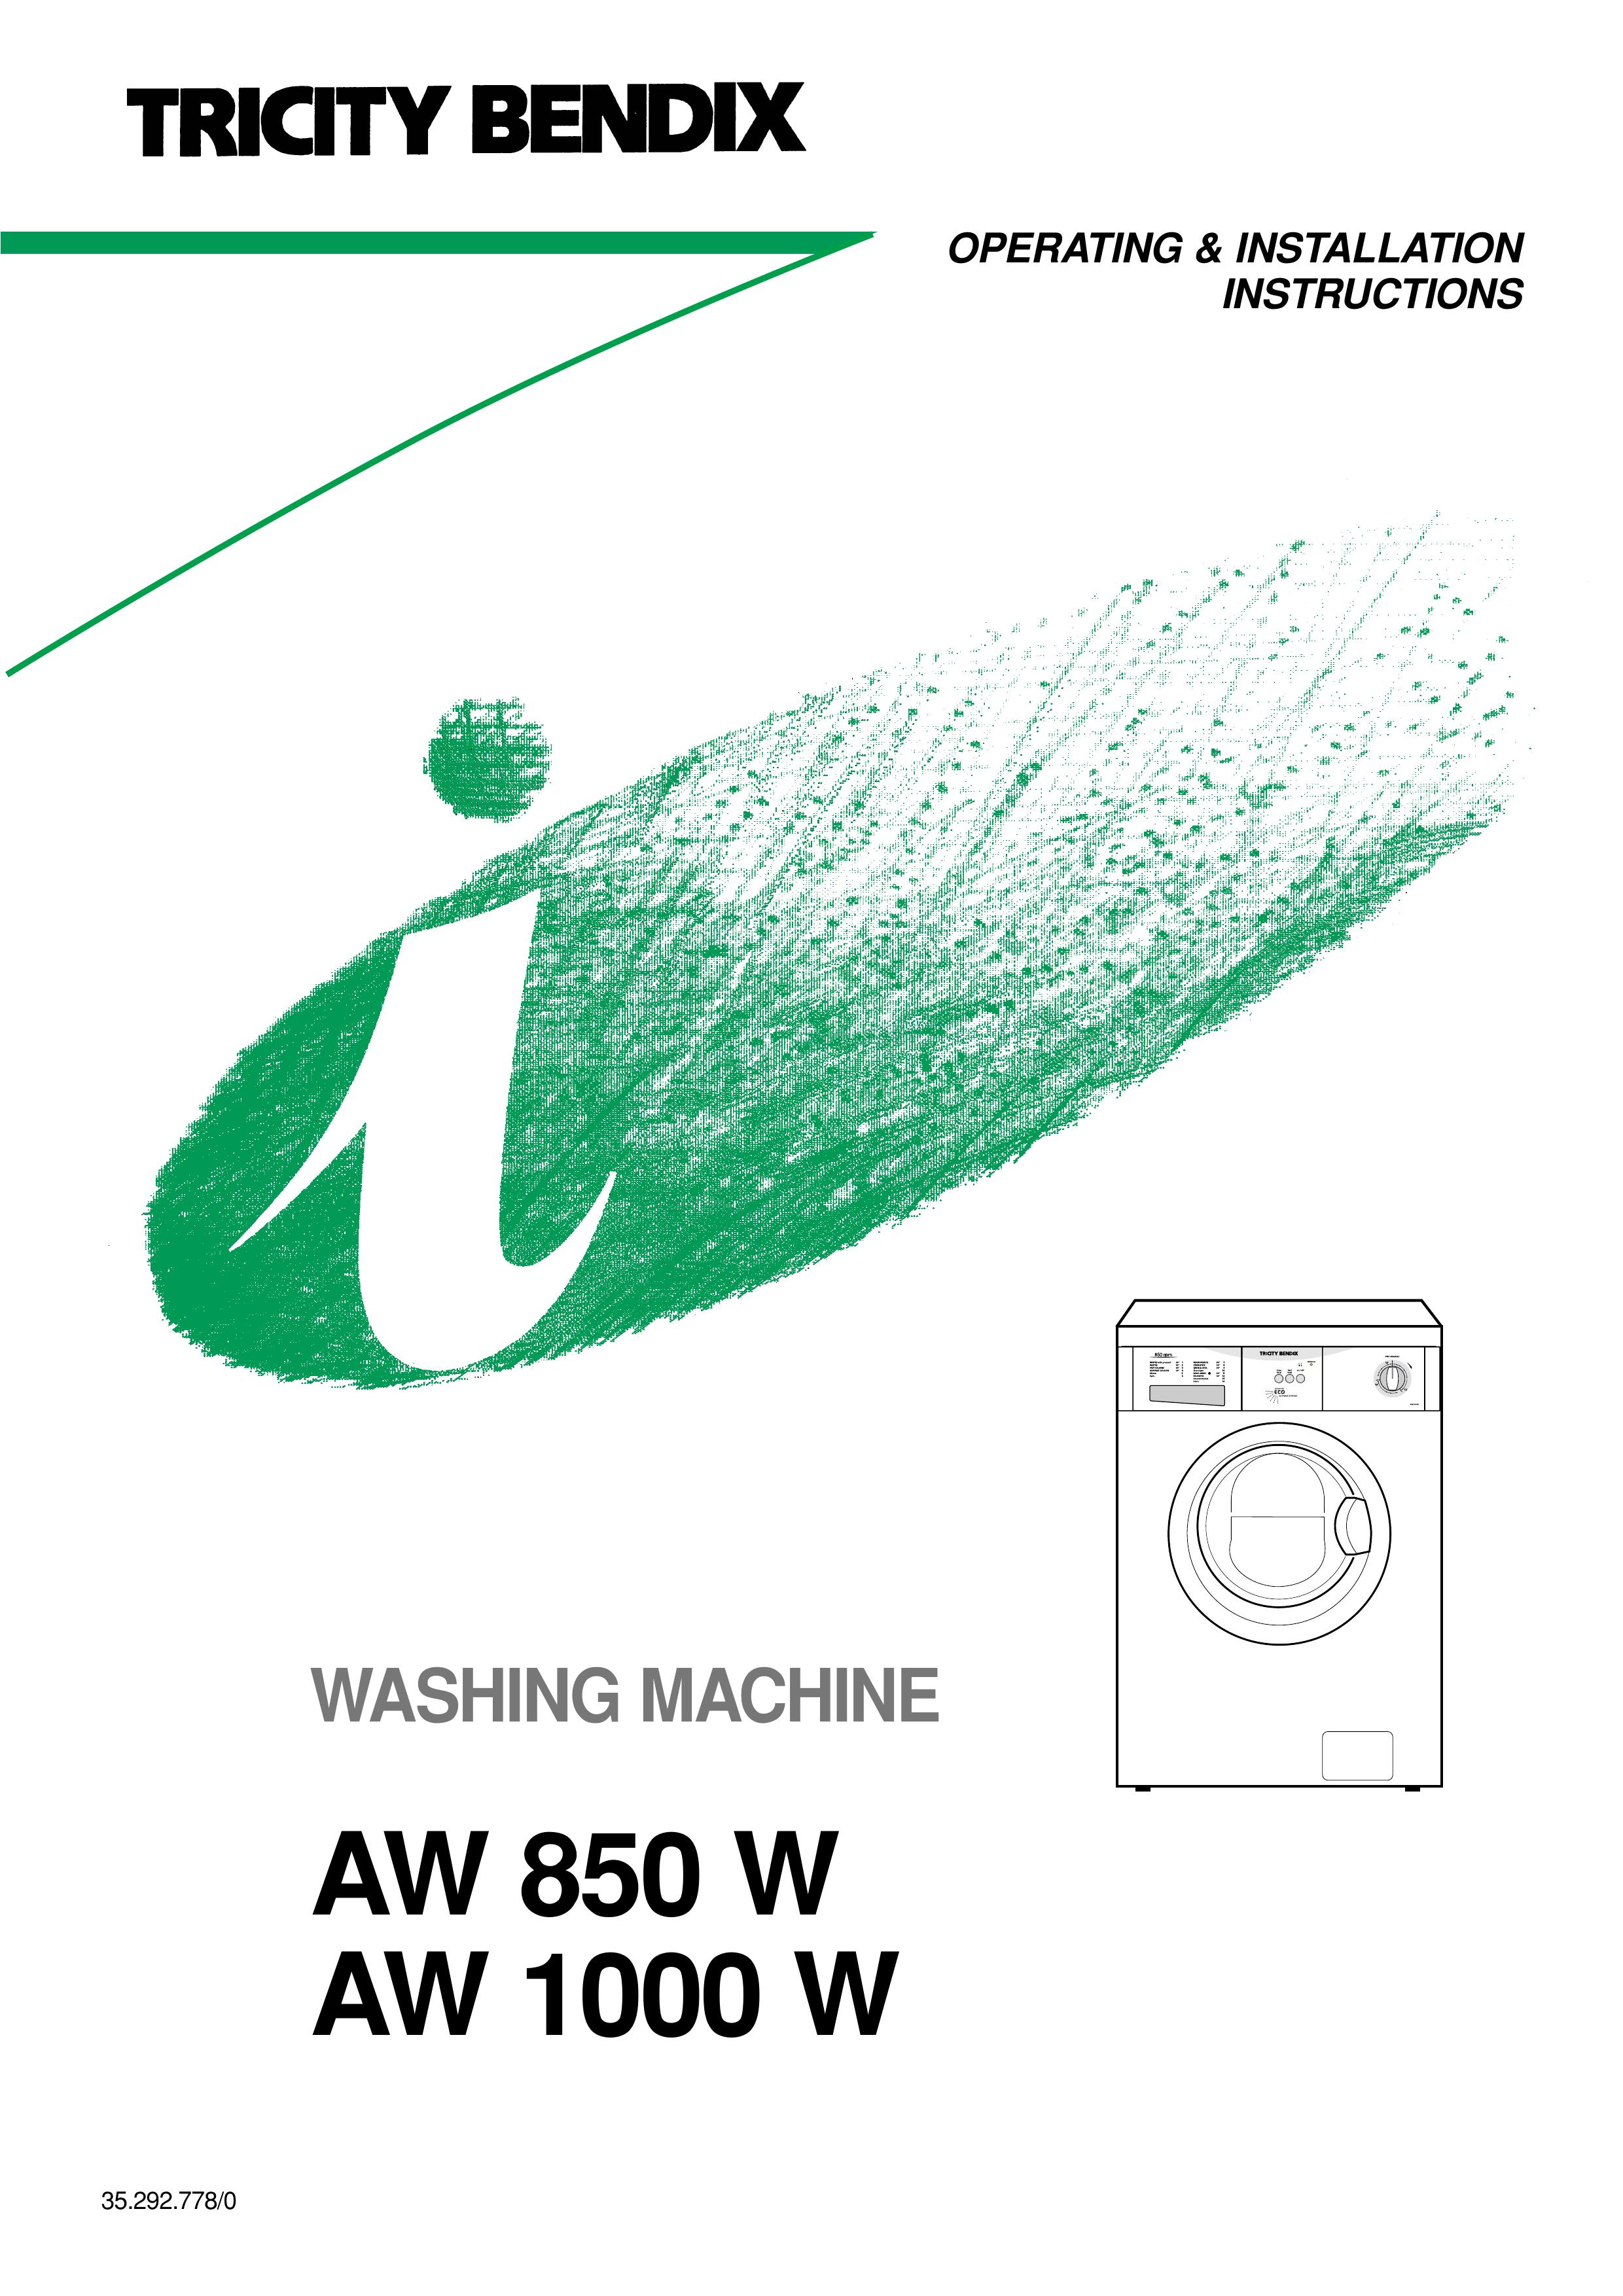 Tricity Bendix AW 850 W Washer/Dryer User Manual